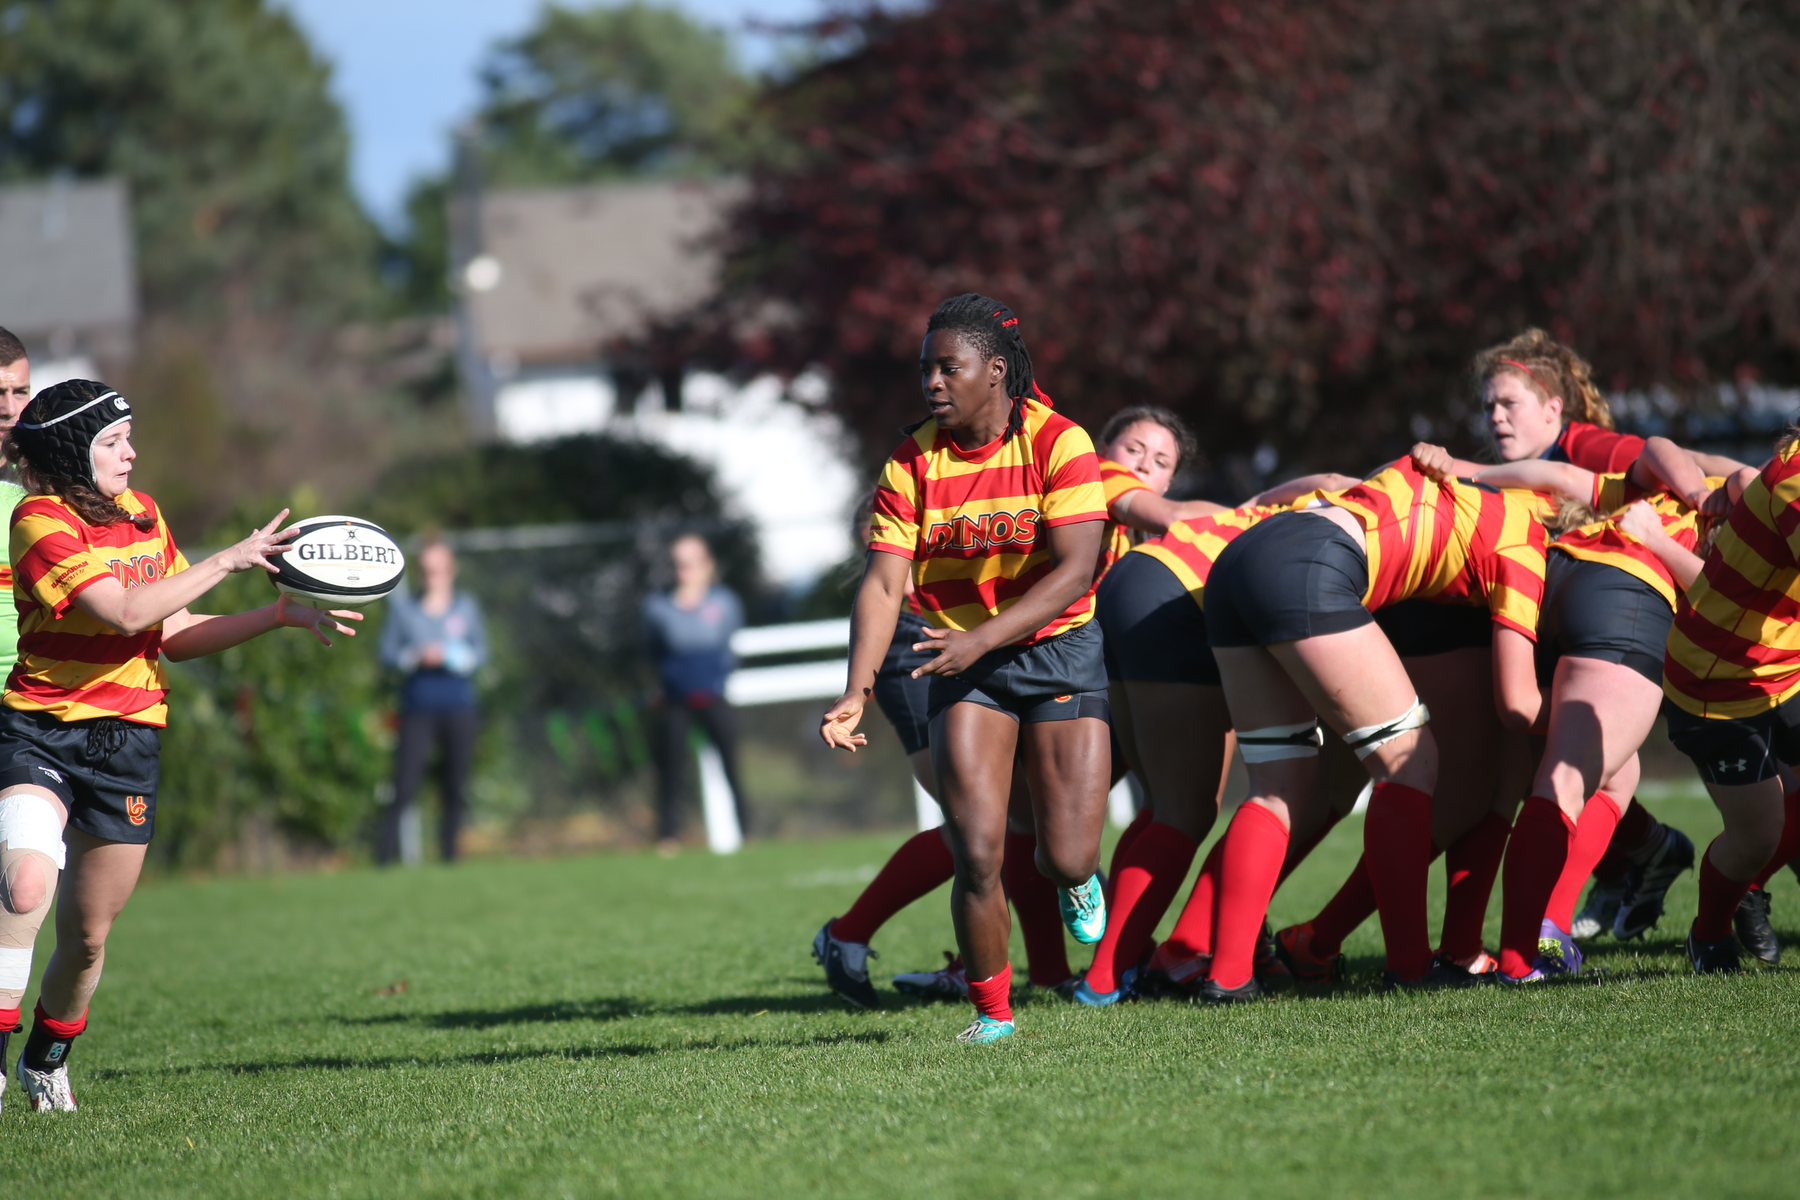 2016 Women's Rugby Championships Quarter Final #1: Ogunjimi scores four tries to lead Calgary over Acadia in opener